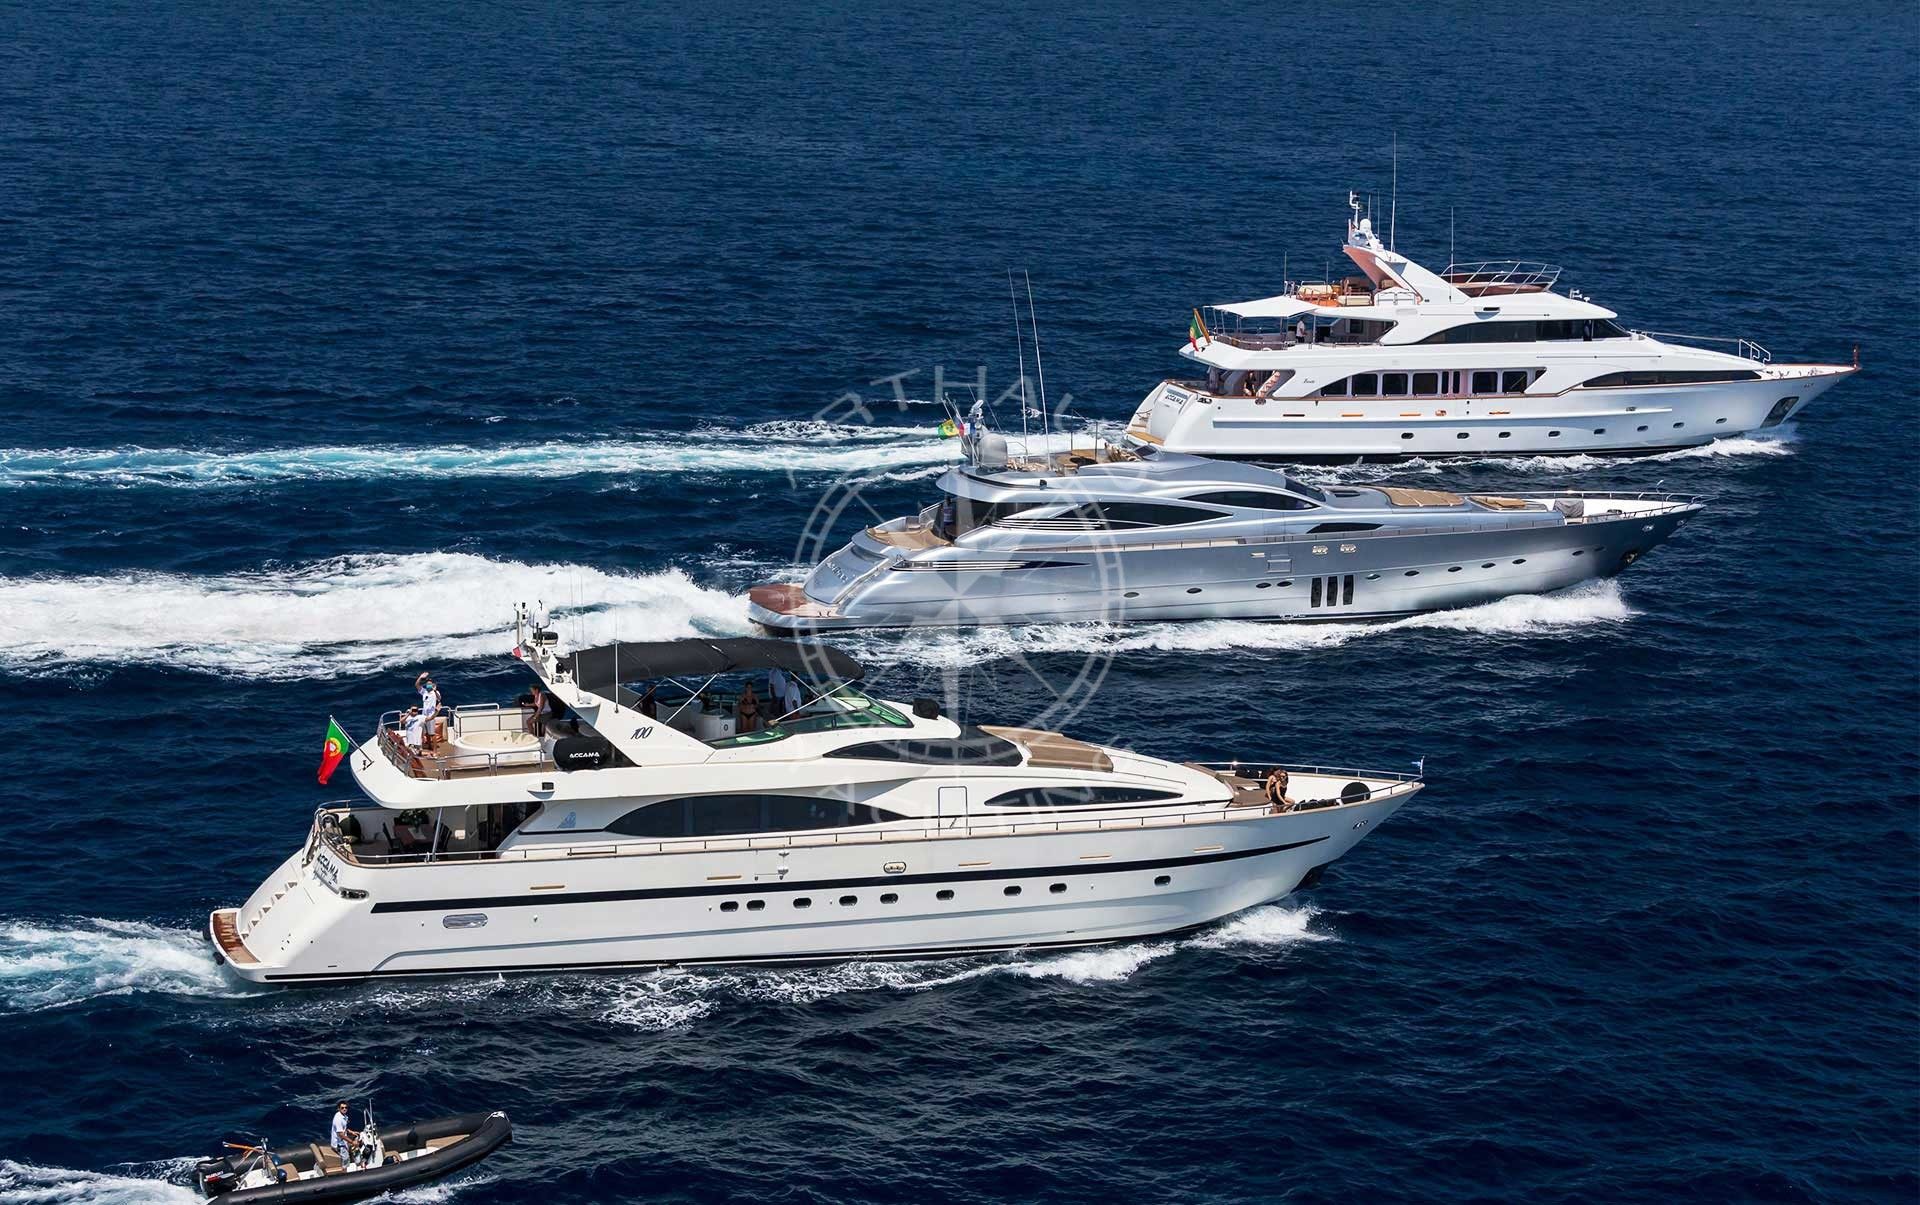 arthaud-yachting-yacht-charter-and-rental-in-the-mediterranean-sea